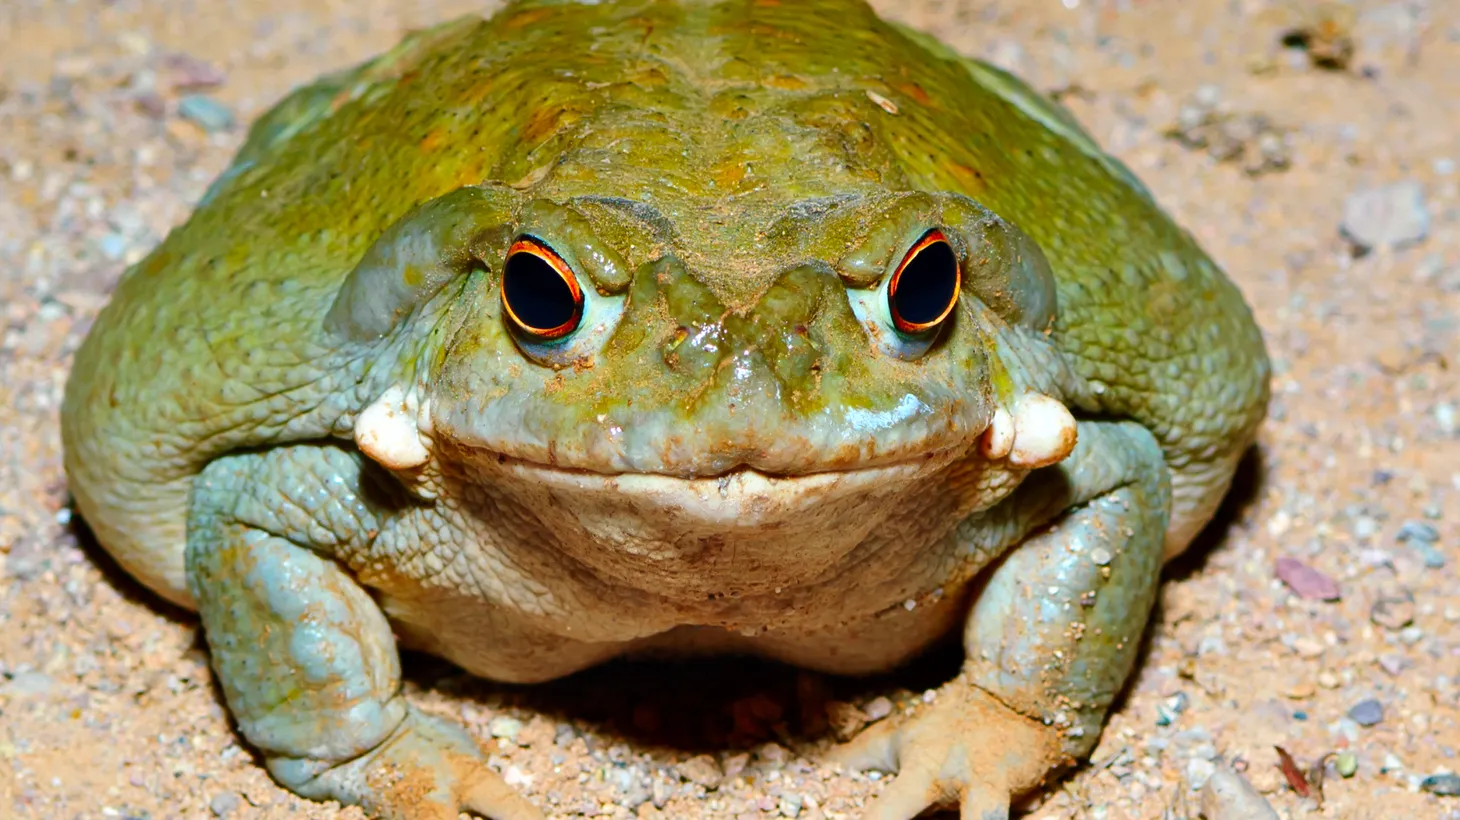 Do not lick the Sonoran Desert Toad, which releases bufotenin toxins as a defense.